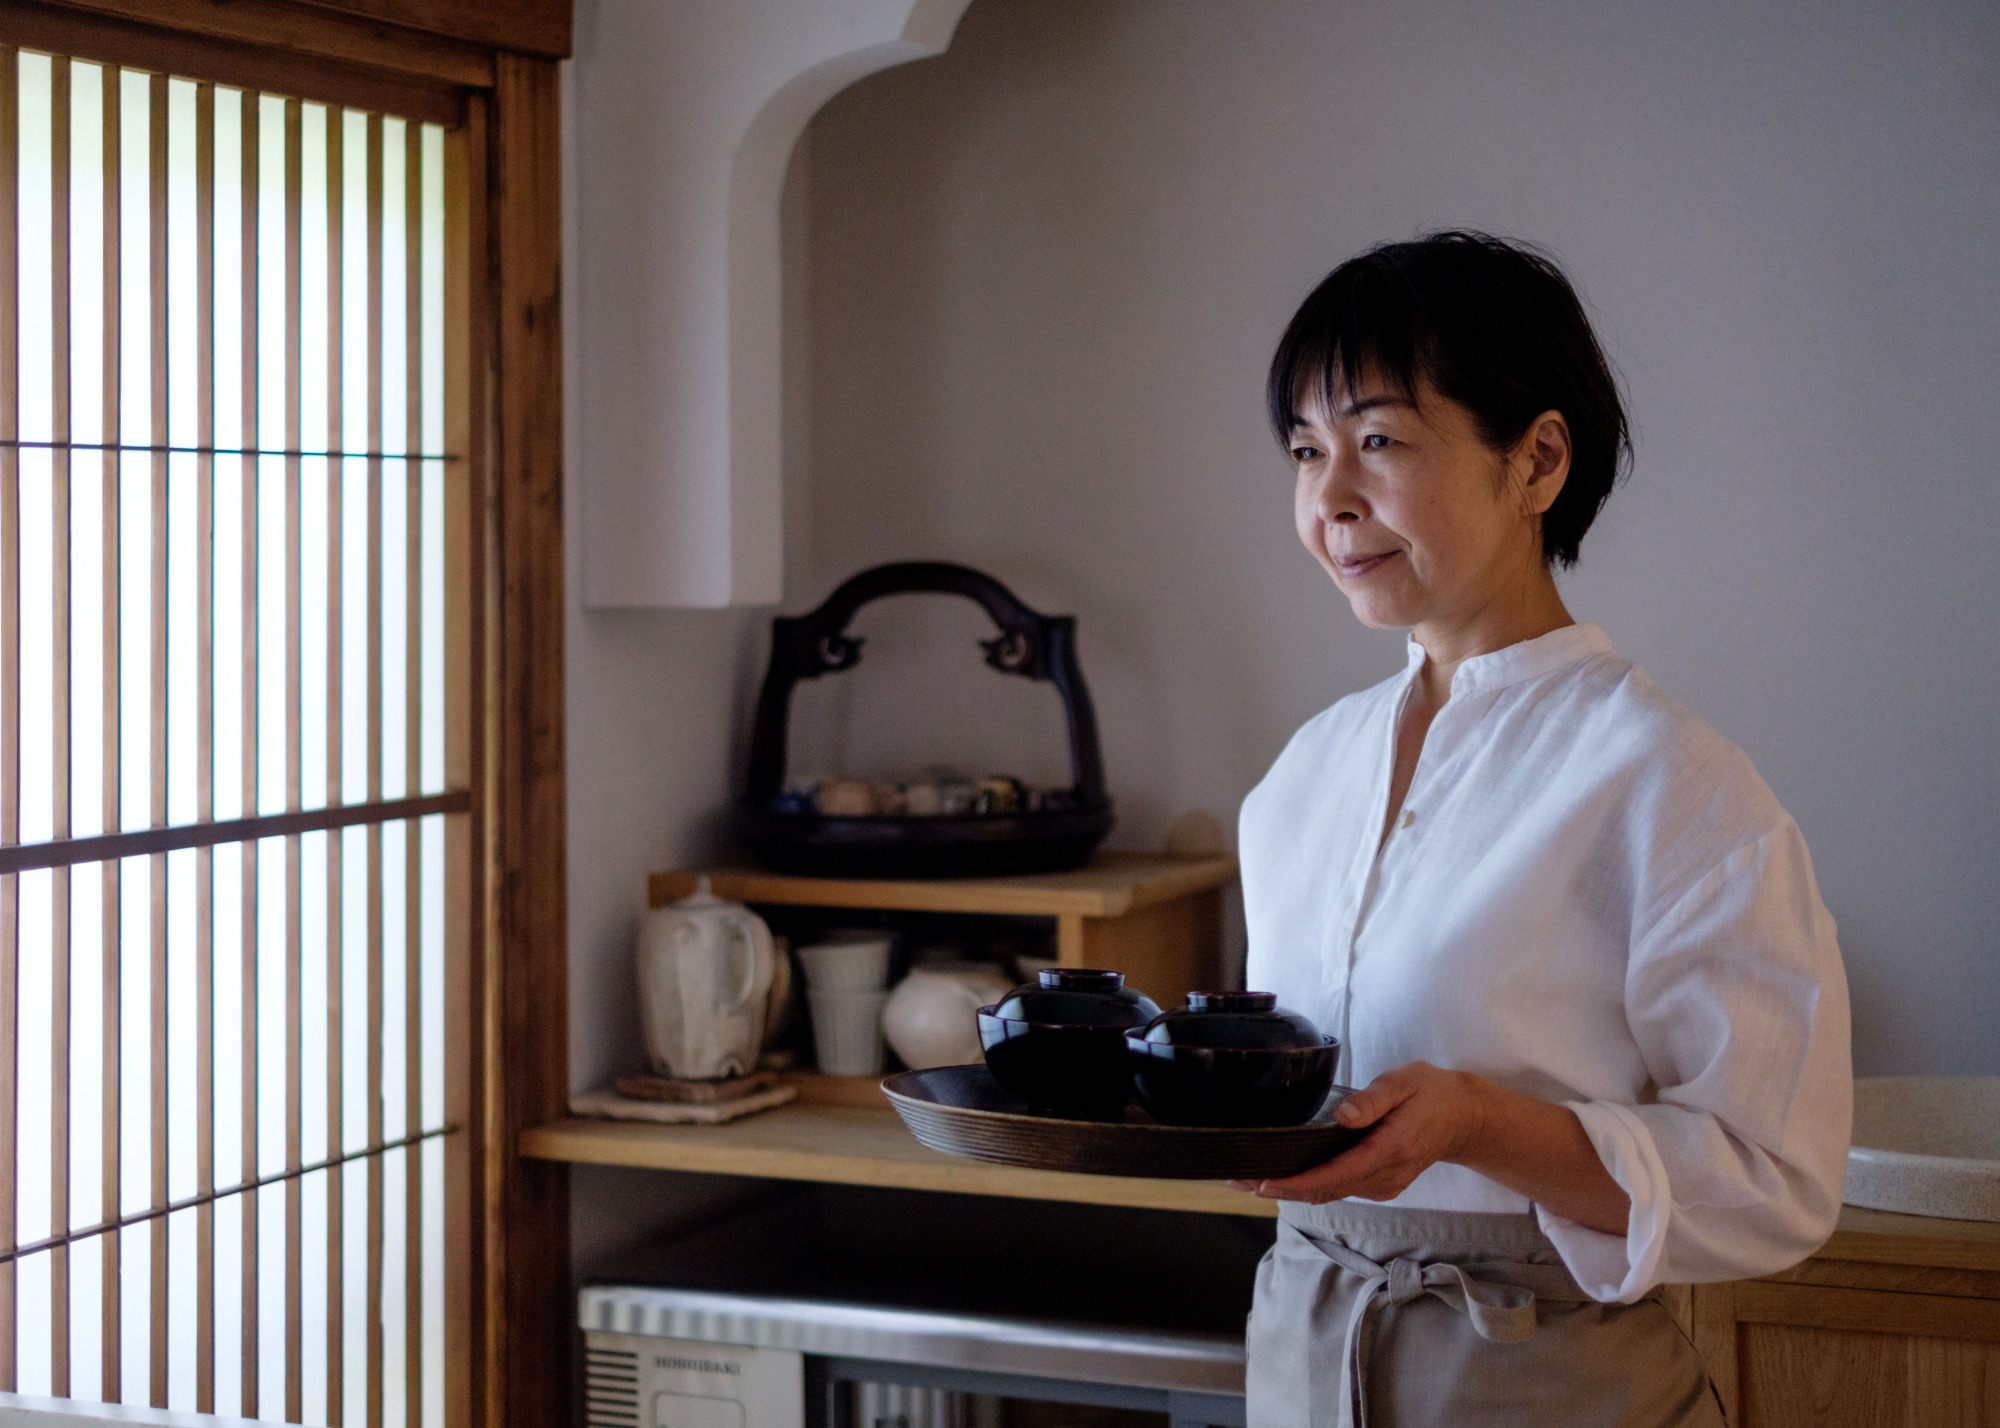 International acclaim: Rica Maezawa is the first Japanese chef to be chosen by Finnair for its Signature Chef menu. | LANCE HENDERSTEIN